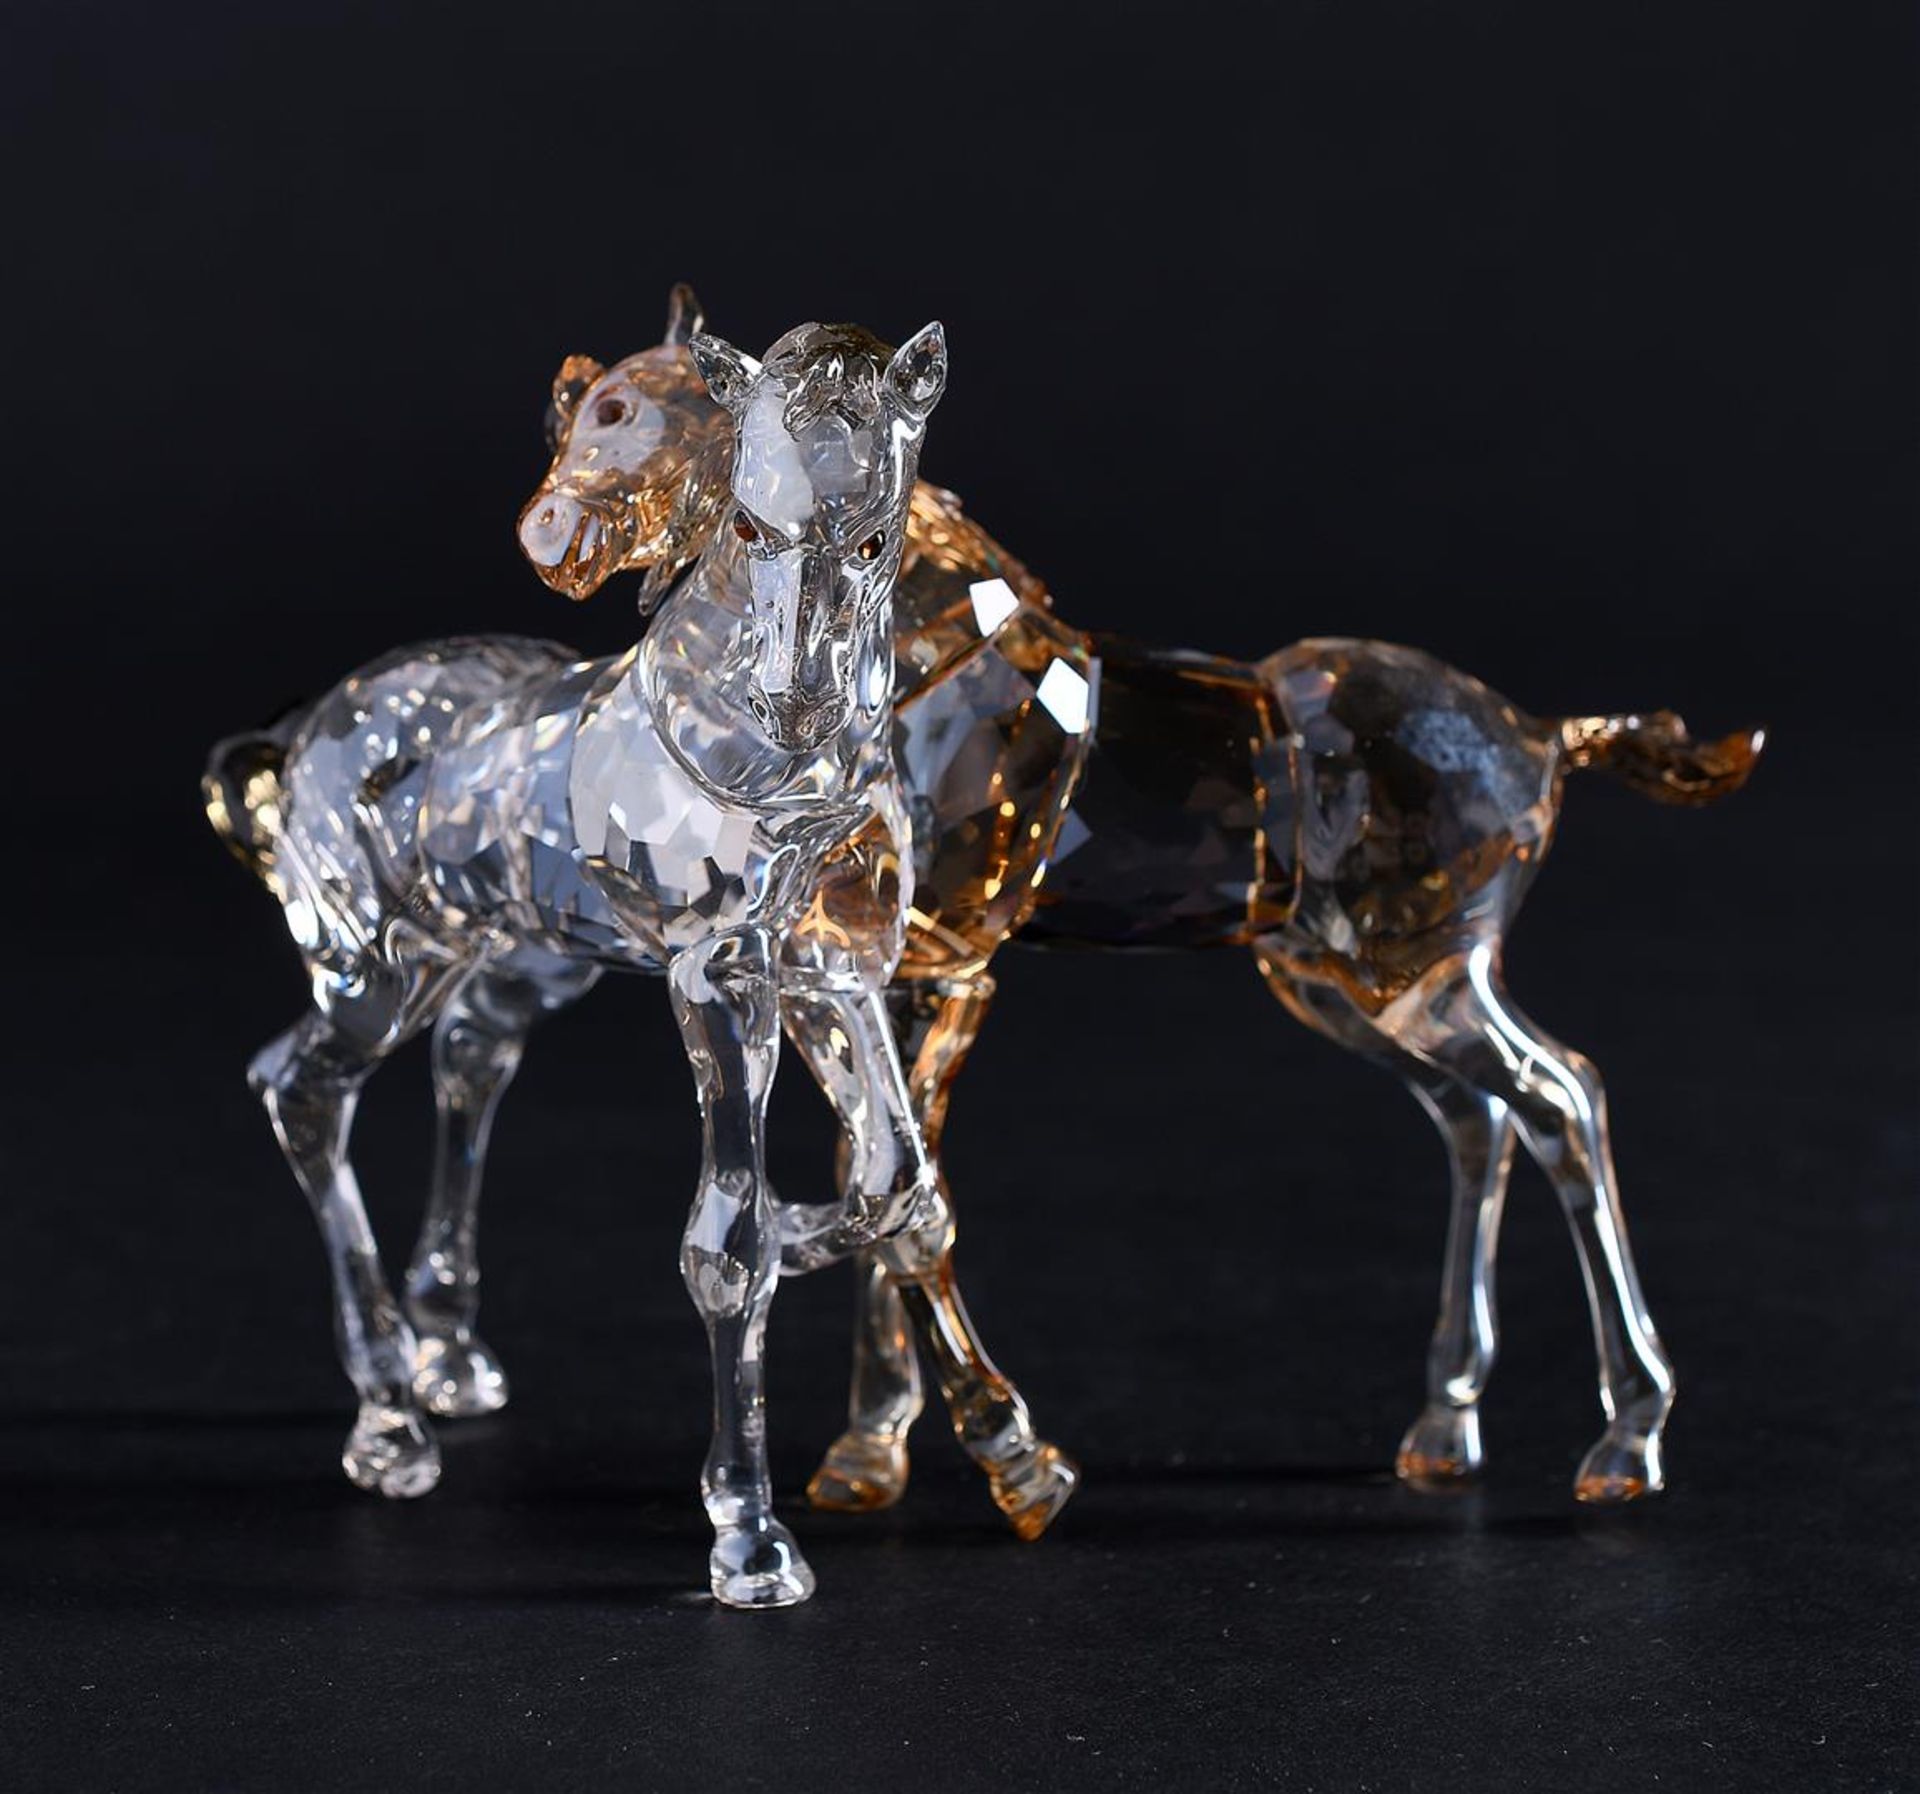 Swarovski, Foals, Year of issue 2012,1121627. Includes original box.
11,9 x 9,2 cm. - Image 2 of 8